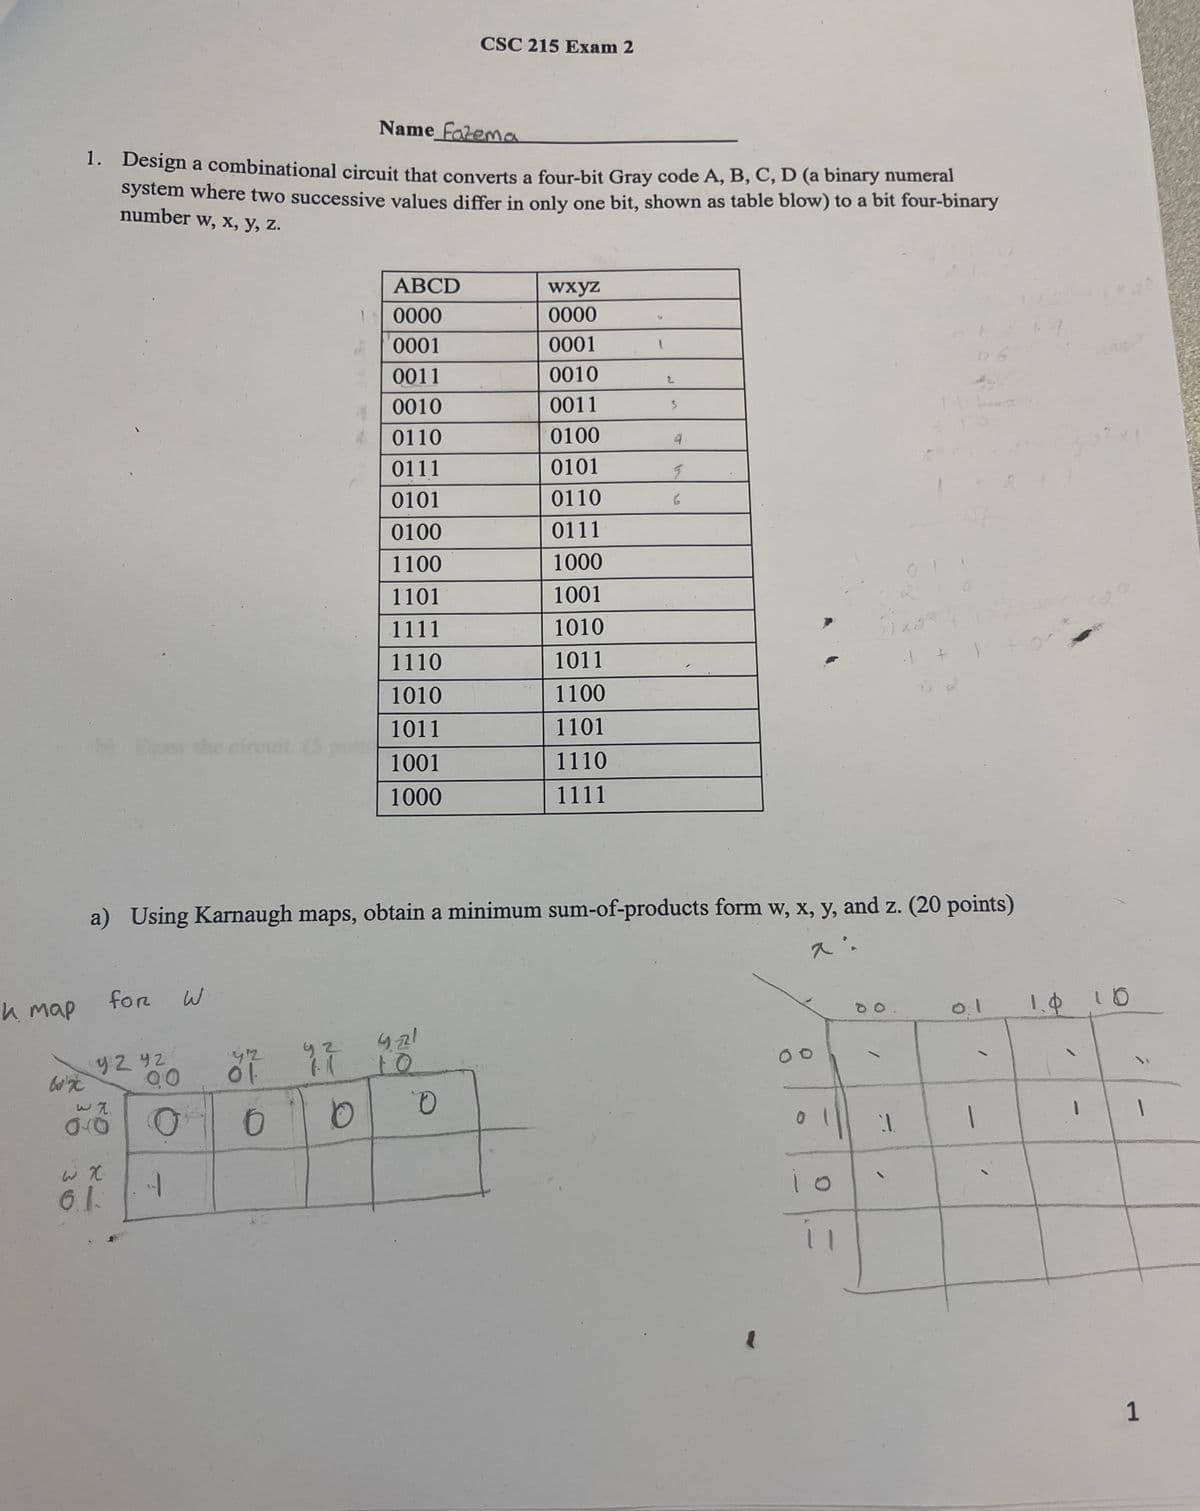 CSC 215 Exam 2
Name Fatema
1. Design a combinational circuit that converts a four-bit Gray code A, B, C, D (a binary numeral
system where two successive values differ in only one bit, shown as table blow) to a bit four-binary
number w, x, y, z.
ABCD
wxyz
0000
0000
0001
0001
0011
0010
4
0010
0011
0110
0100
4
0111
0101
g
0101
0110
6
0100
0111
1100
1000
1101
1001
1111
1010
1110
1011
1010
1100
1011
1101
b) Do the circuit (5
1001
1110
1000
1111
1x2
a) Using Karnaugh maps, obtain a minimum sum-of-products form w, x, y, and z. (20 points)
0:1
1.0
10
00
h map
for
W
92 92
90
2
9-21
10
O
0
0
D
0
ωχ
6.1.
ド
0
1
1
1